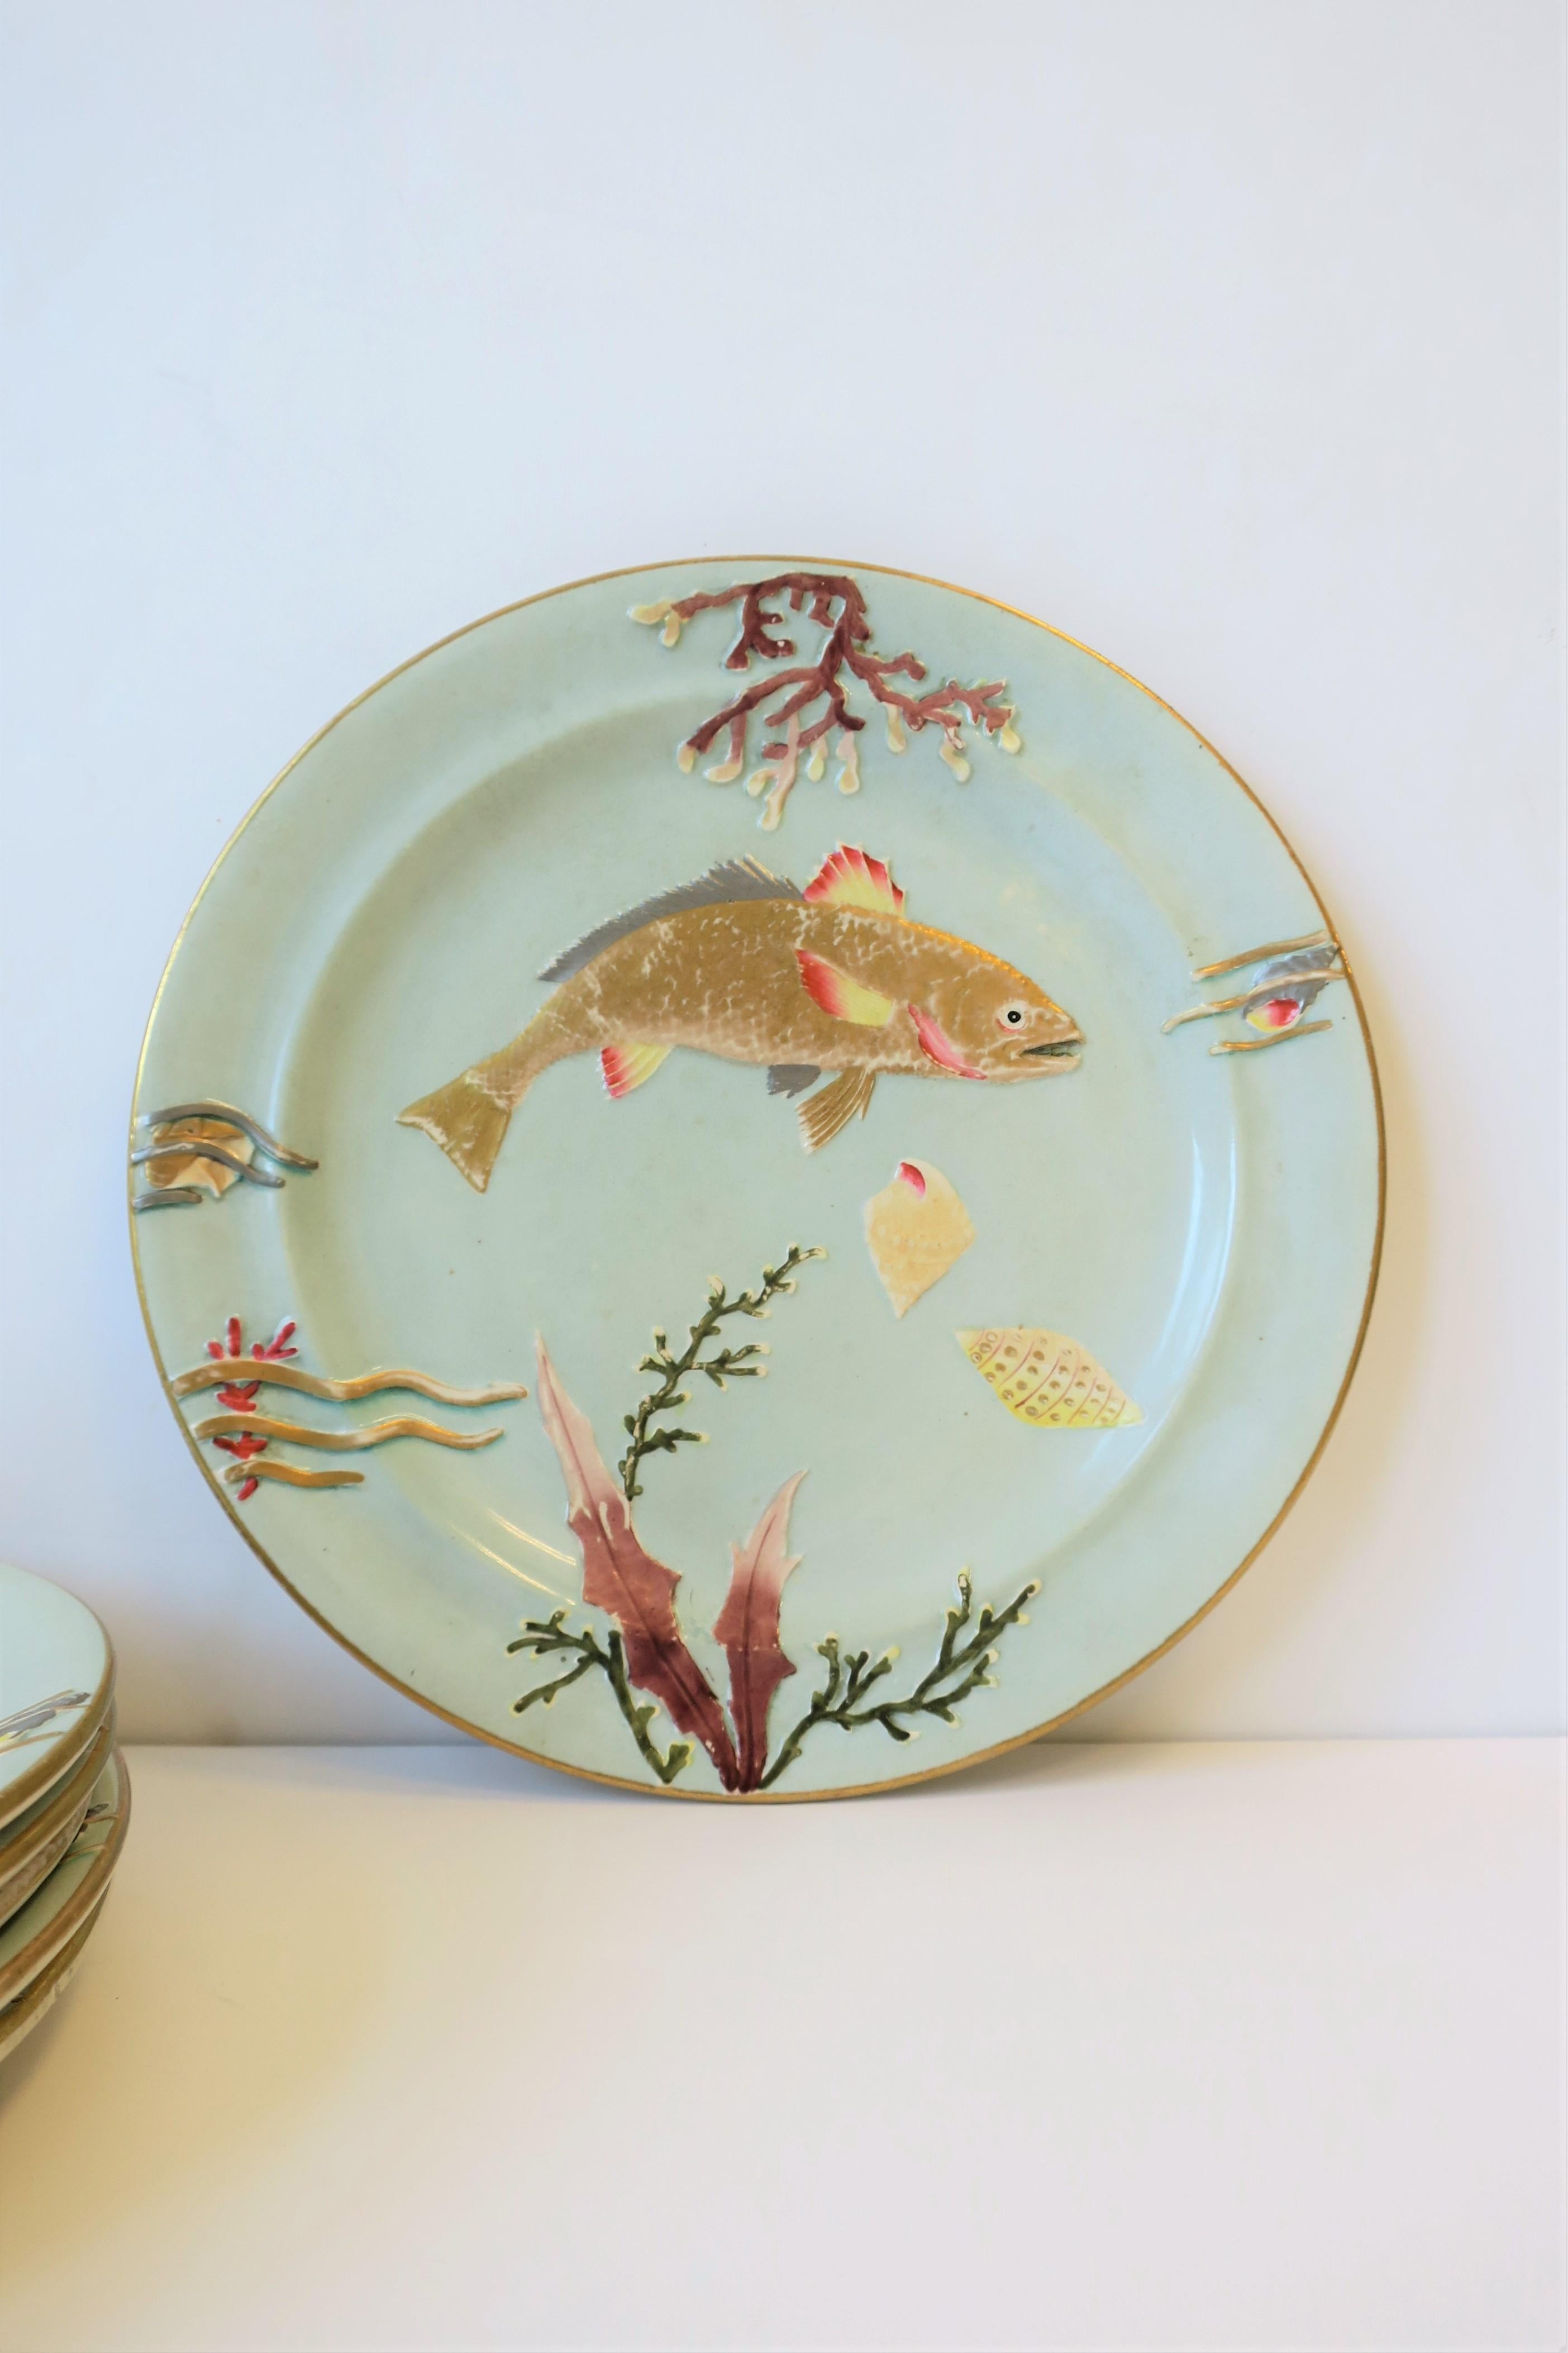 20th Century Antique Dinner Plates with Gold Fish and Coral Sea Shell Raised Relief Design